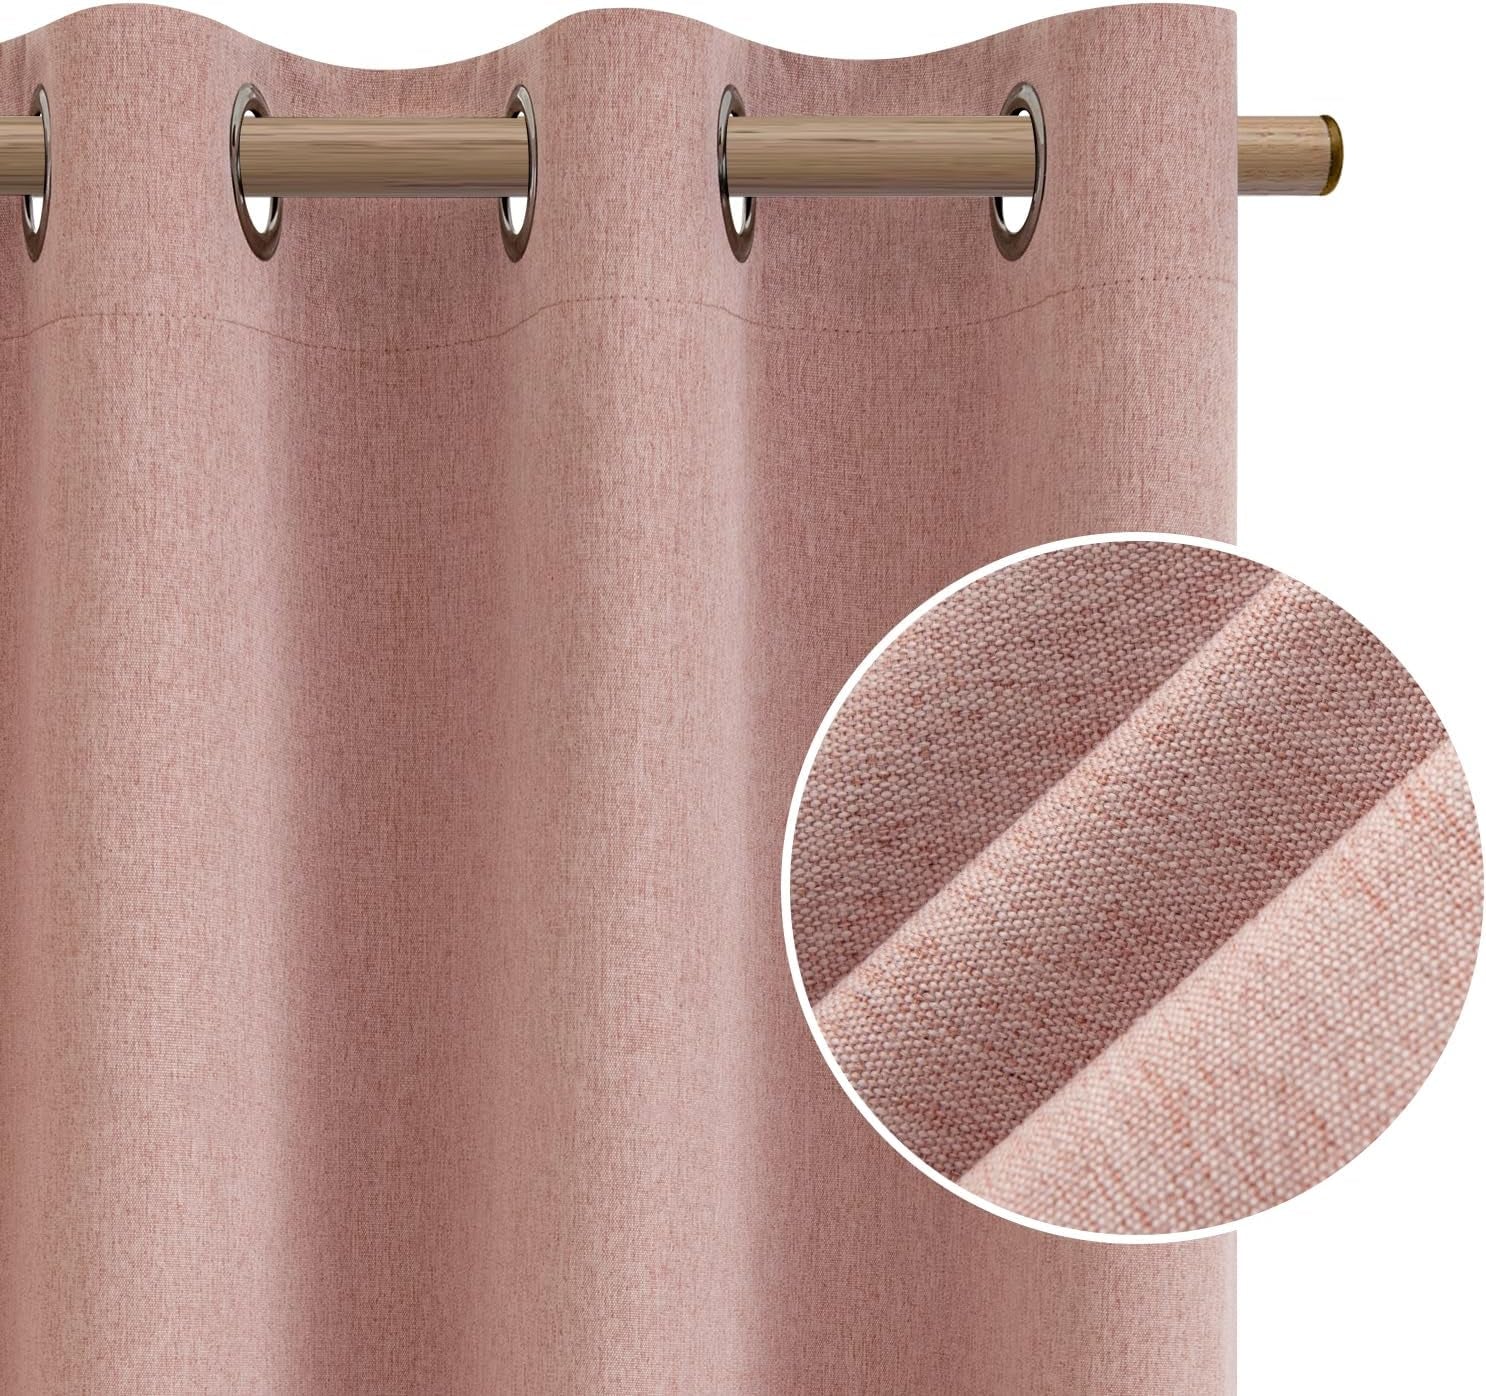 HOMEIDEAS 100% Blackout Linen Curtains for Bedroom 84 Inches Long 2 Panels Blush Pink Curtains Full Black Out Thermal Insulated Grommet Window Curtains/Drapes with Liner for Nursery  HOMEIDEAS   